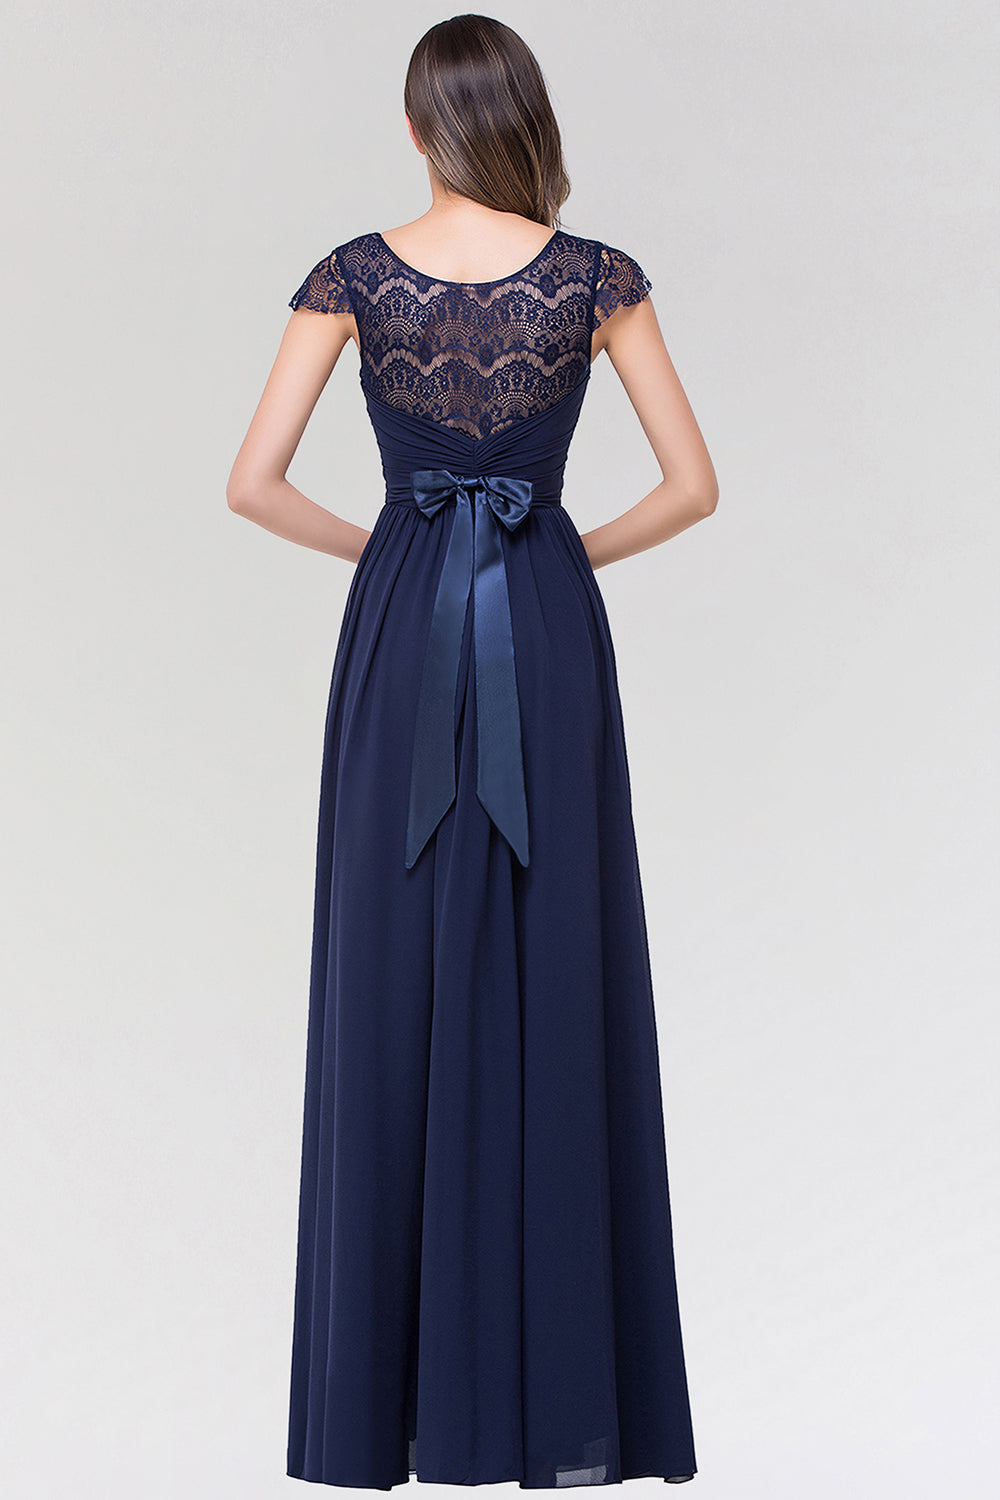 Elegant Lace Scoop Sleeveless Navy Bridesmaid Dress with Buttons-27dress